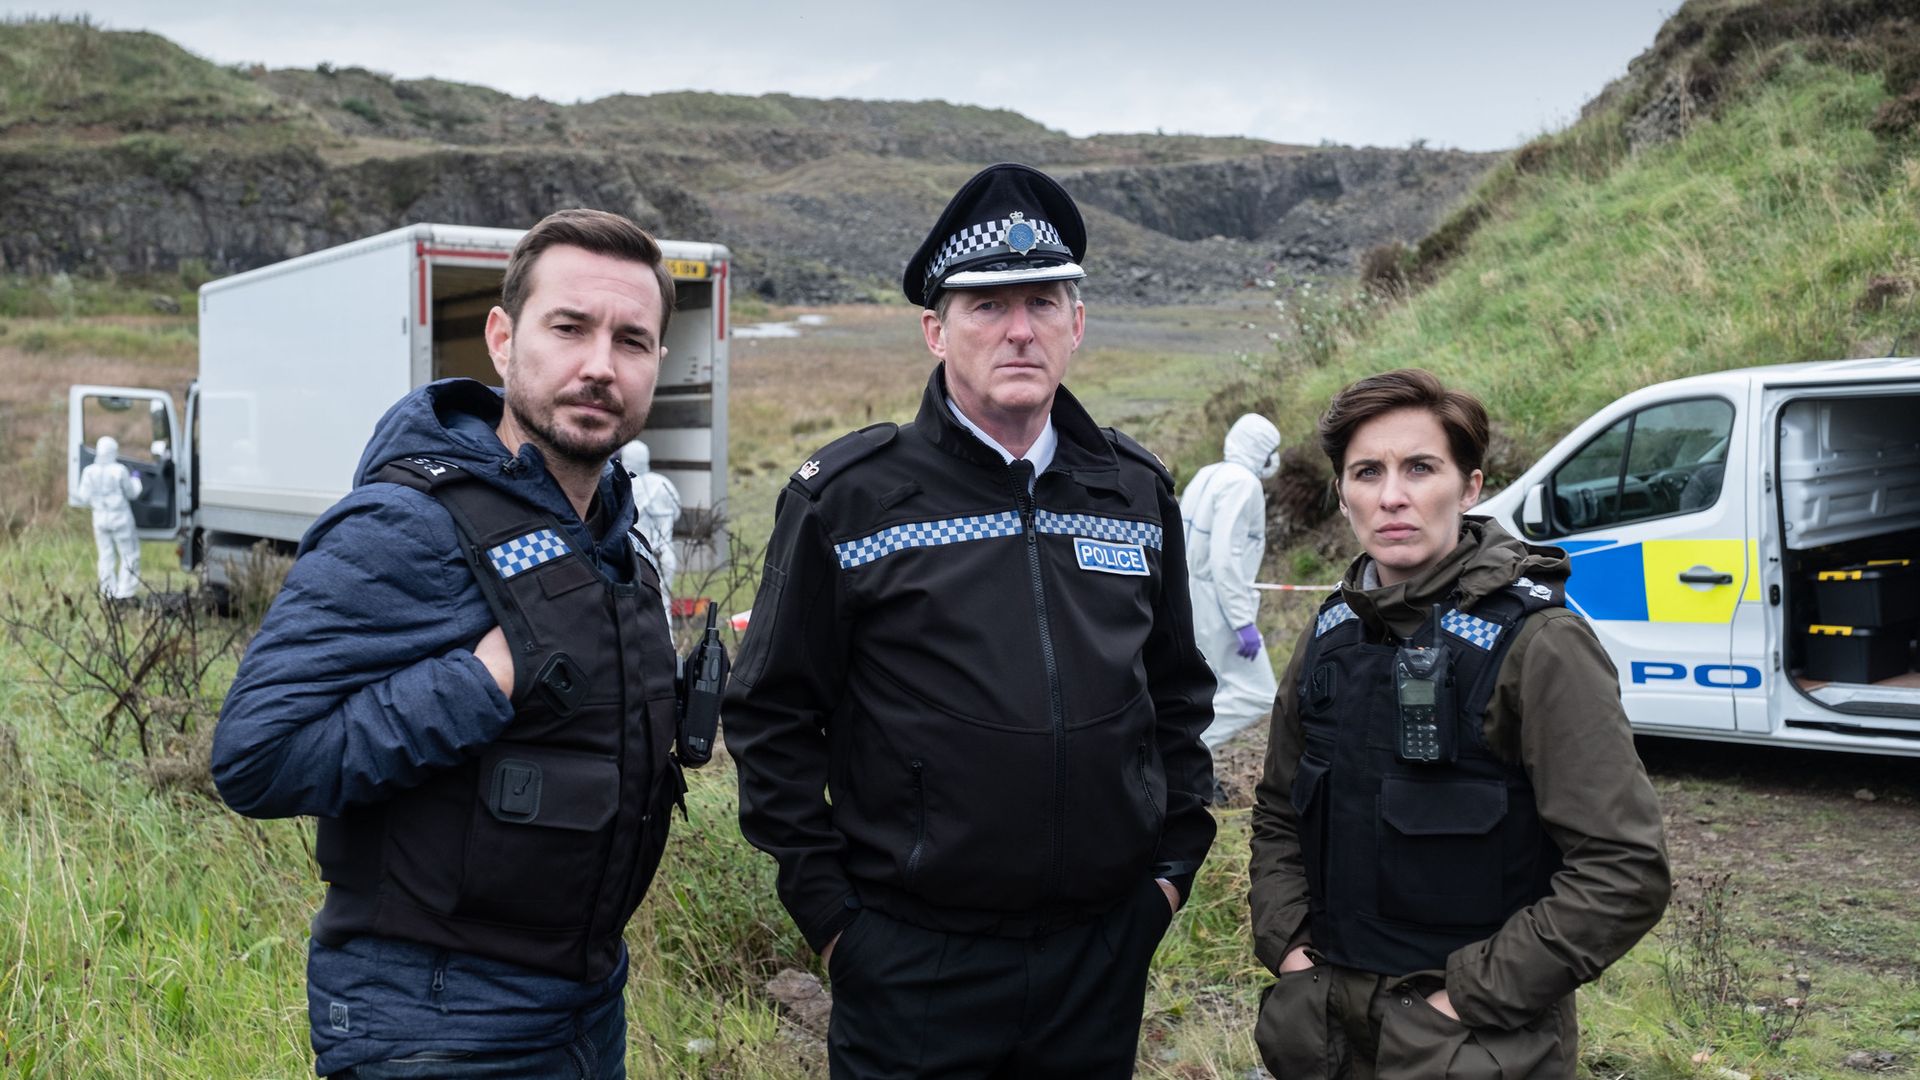 Line of Duty background